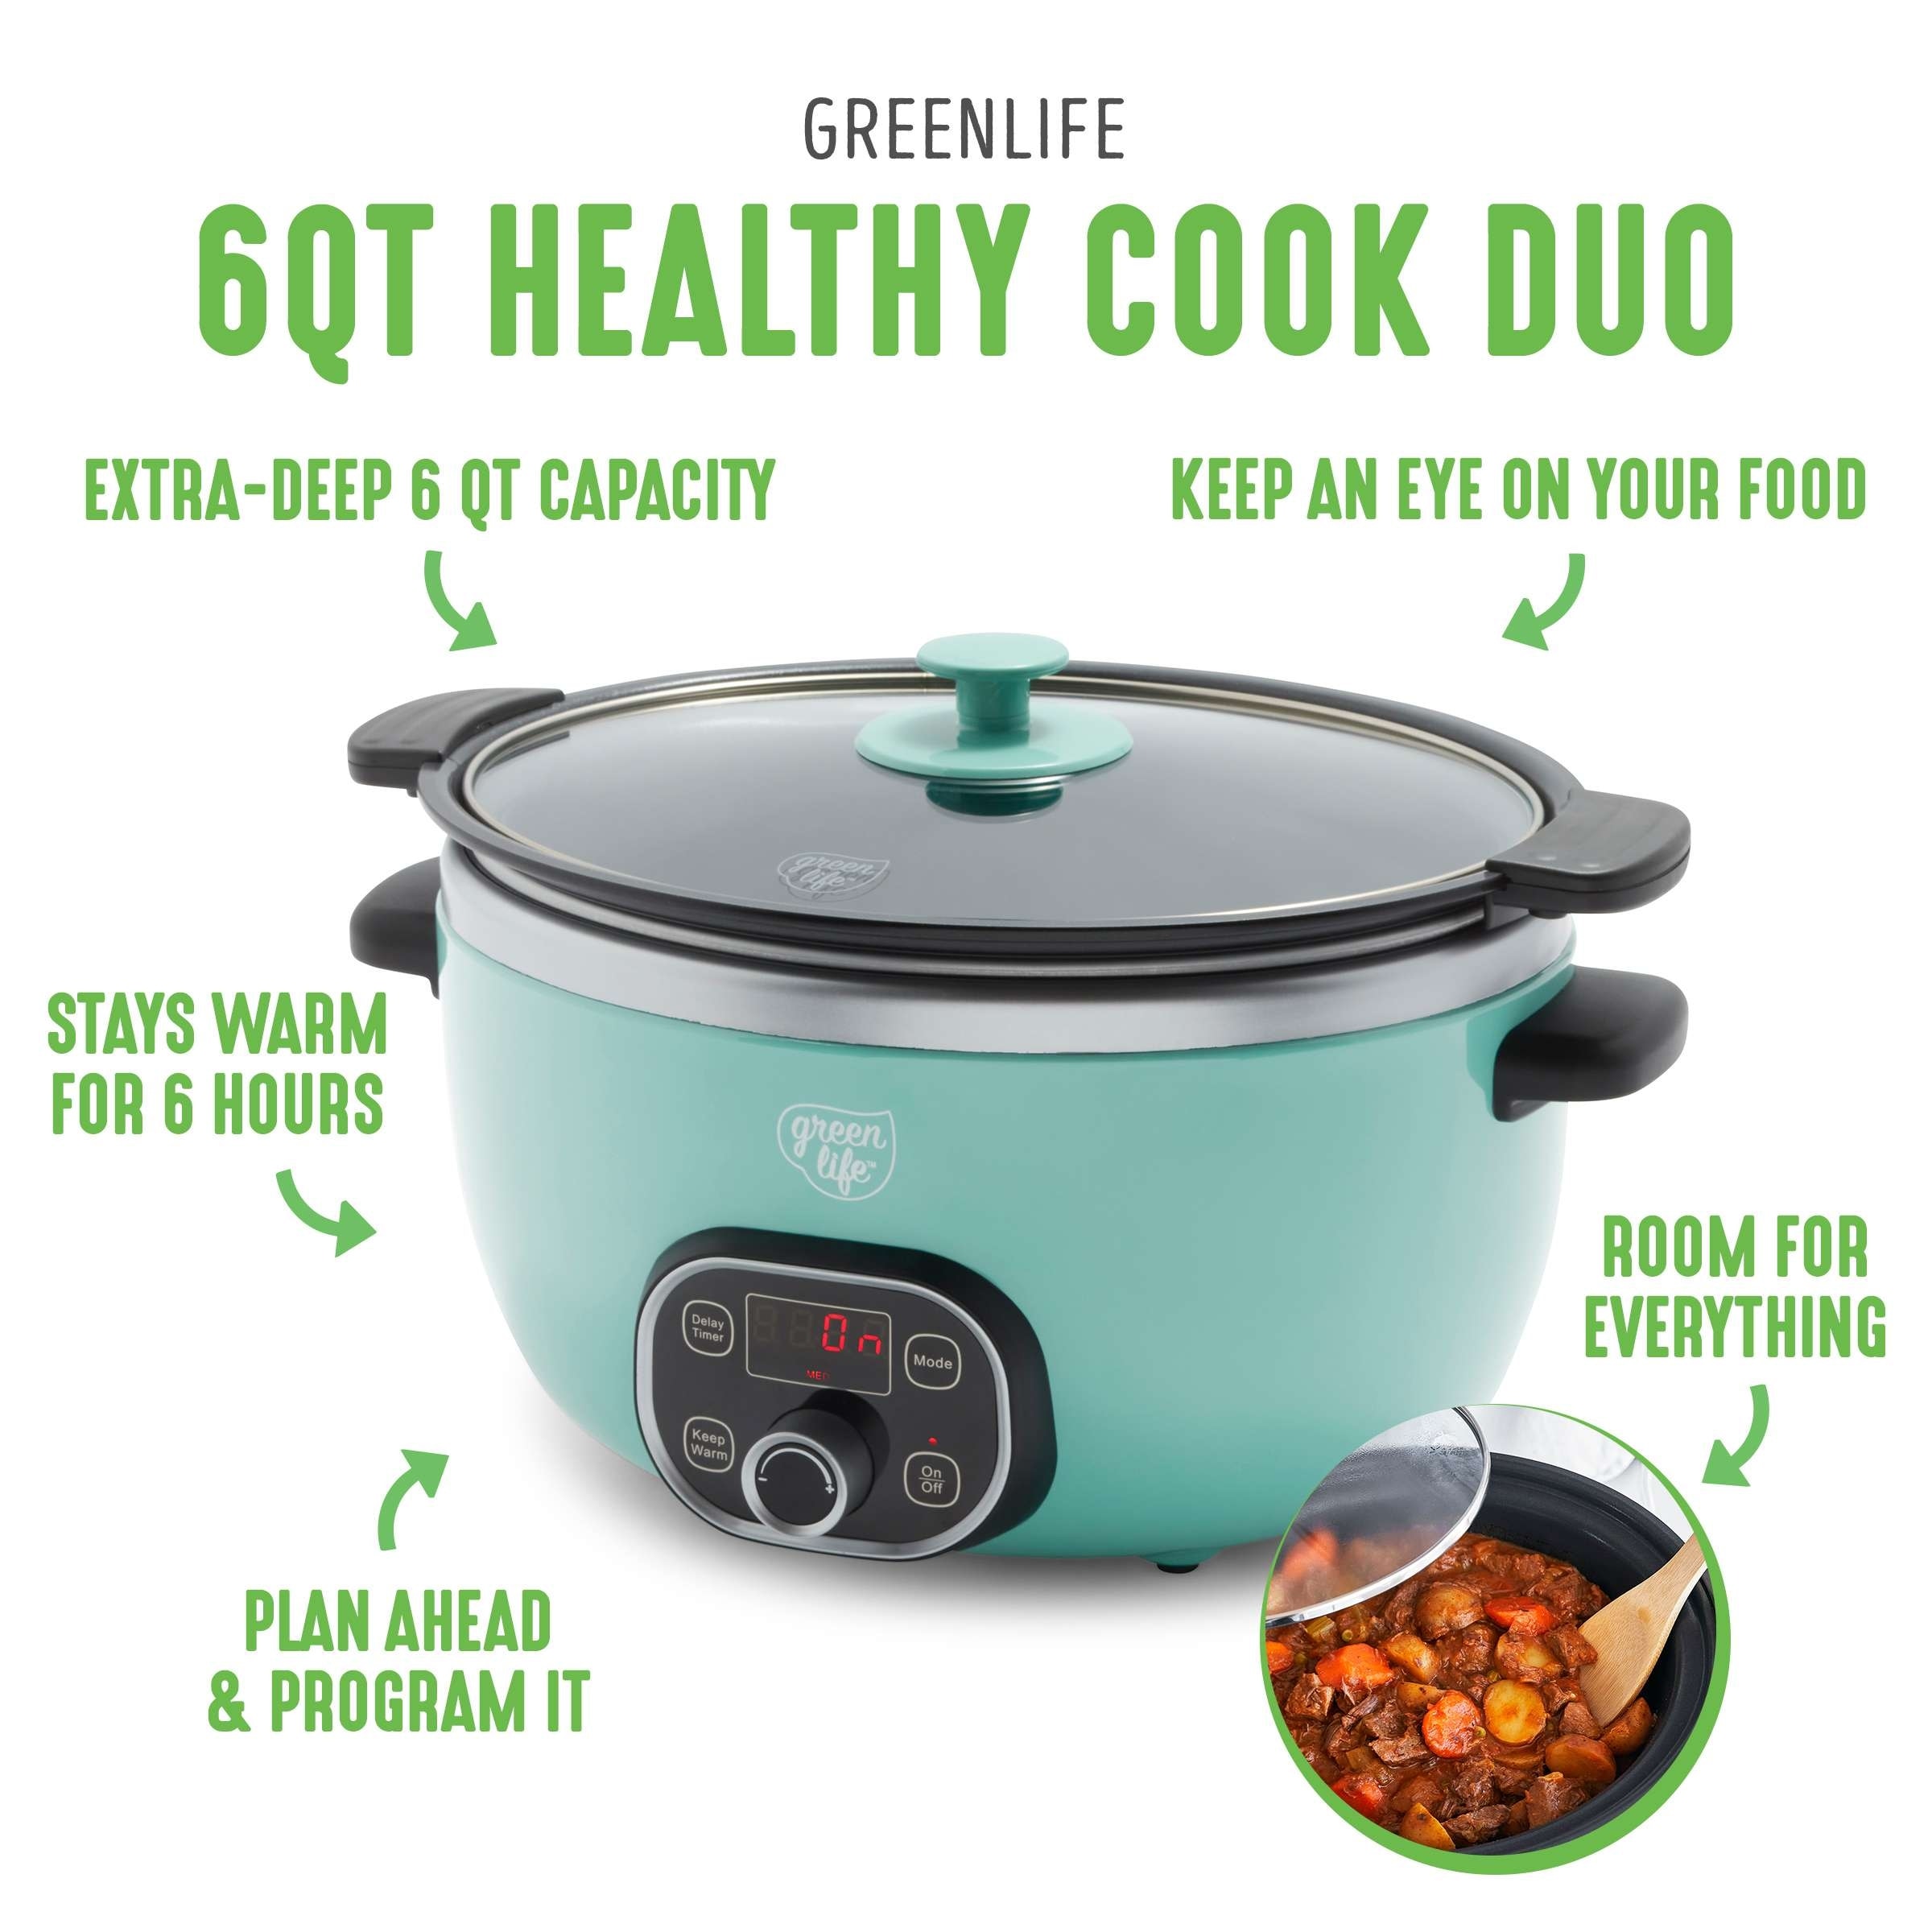 https://ak1.ostkcdn.com/images/products/is/images/direct/9db4d45ee3ef7c7650b5edc39a68dc86a8691d95/GreenLife-Healthy-Ceramic-Nonstick-6qt-Slow-Cooker.jpg